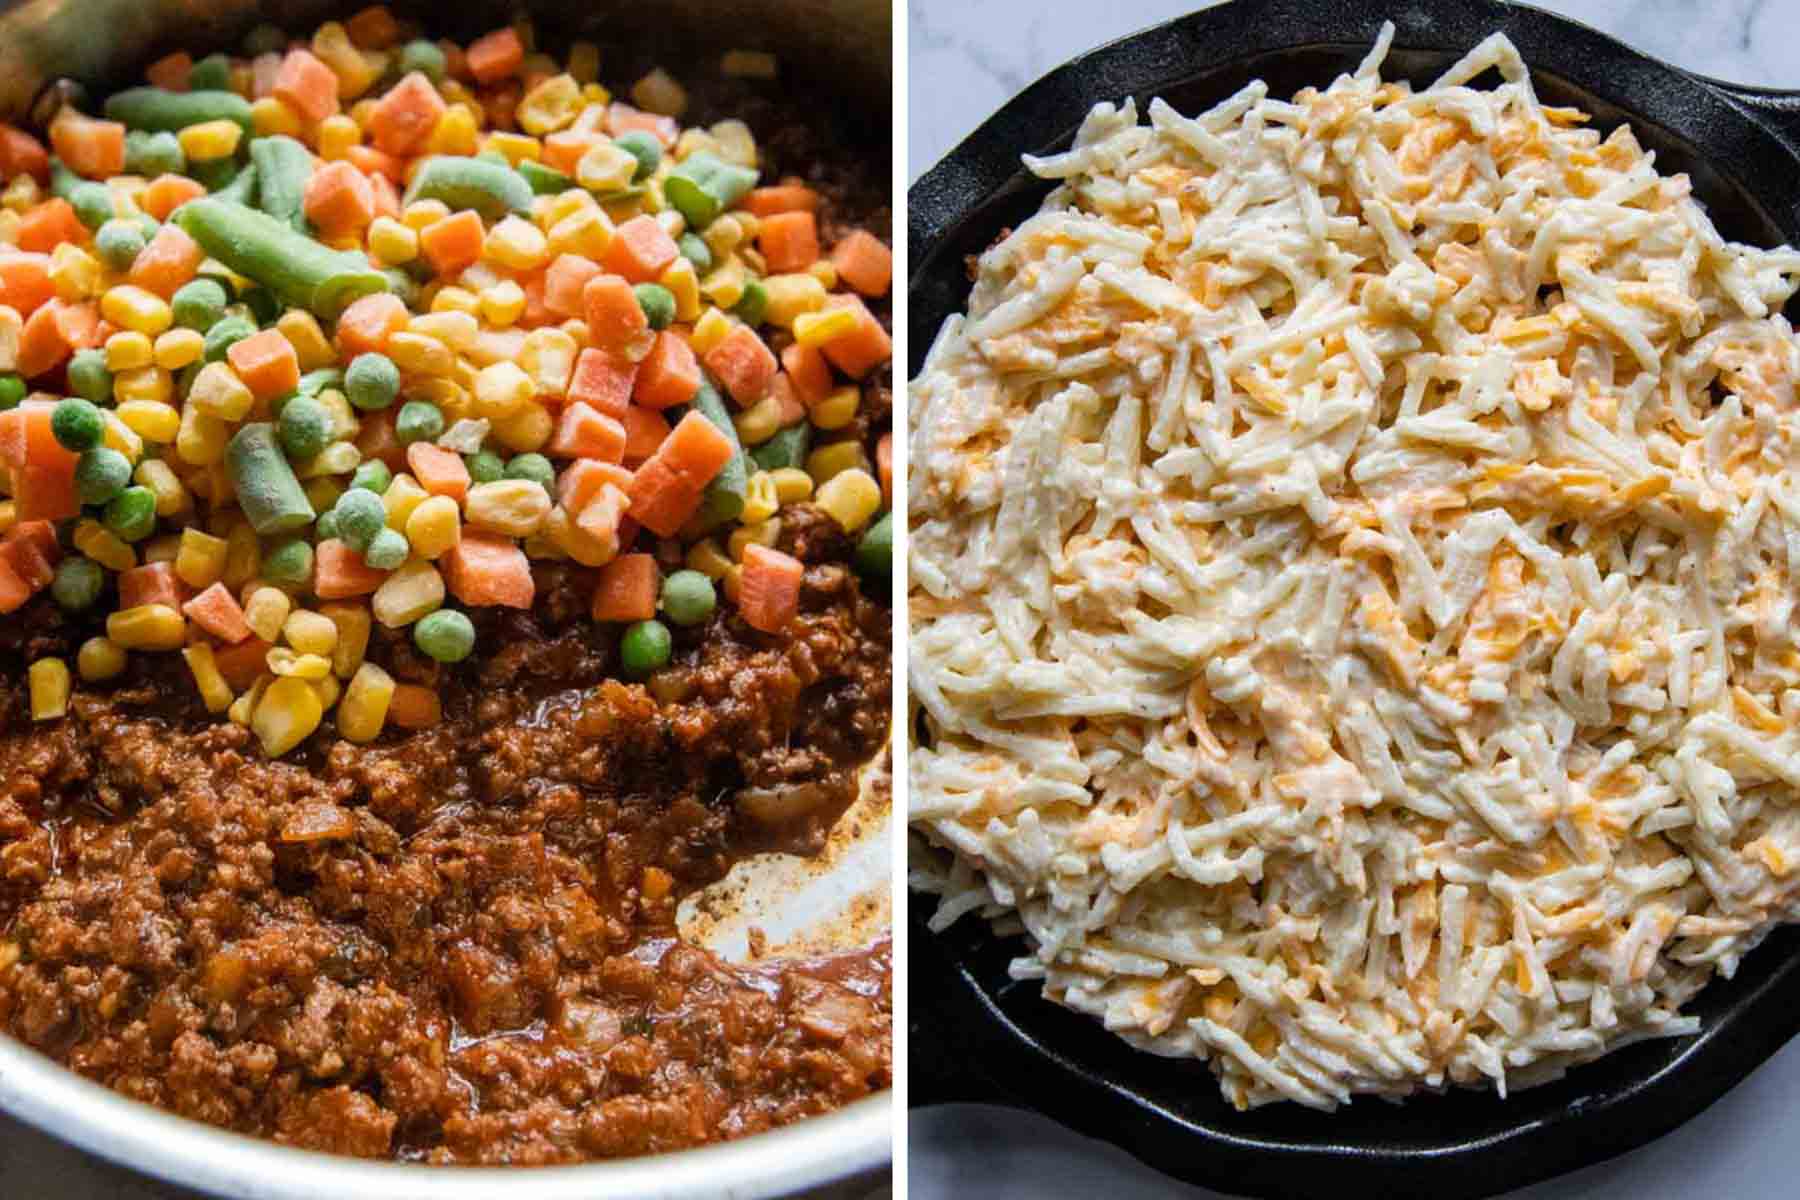 more images showing how to make shepherds pie with hash brown topping.